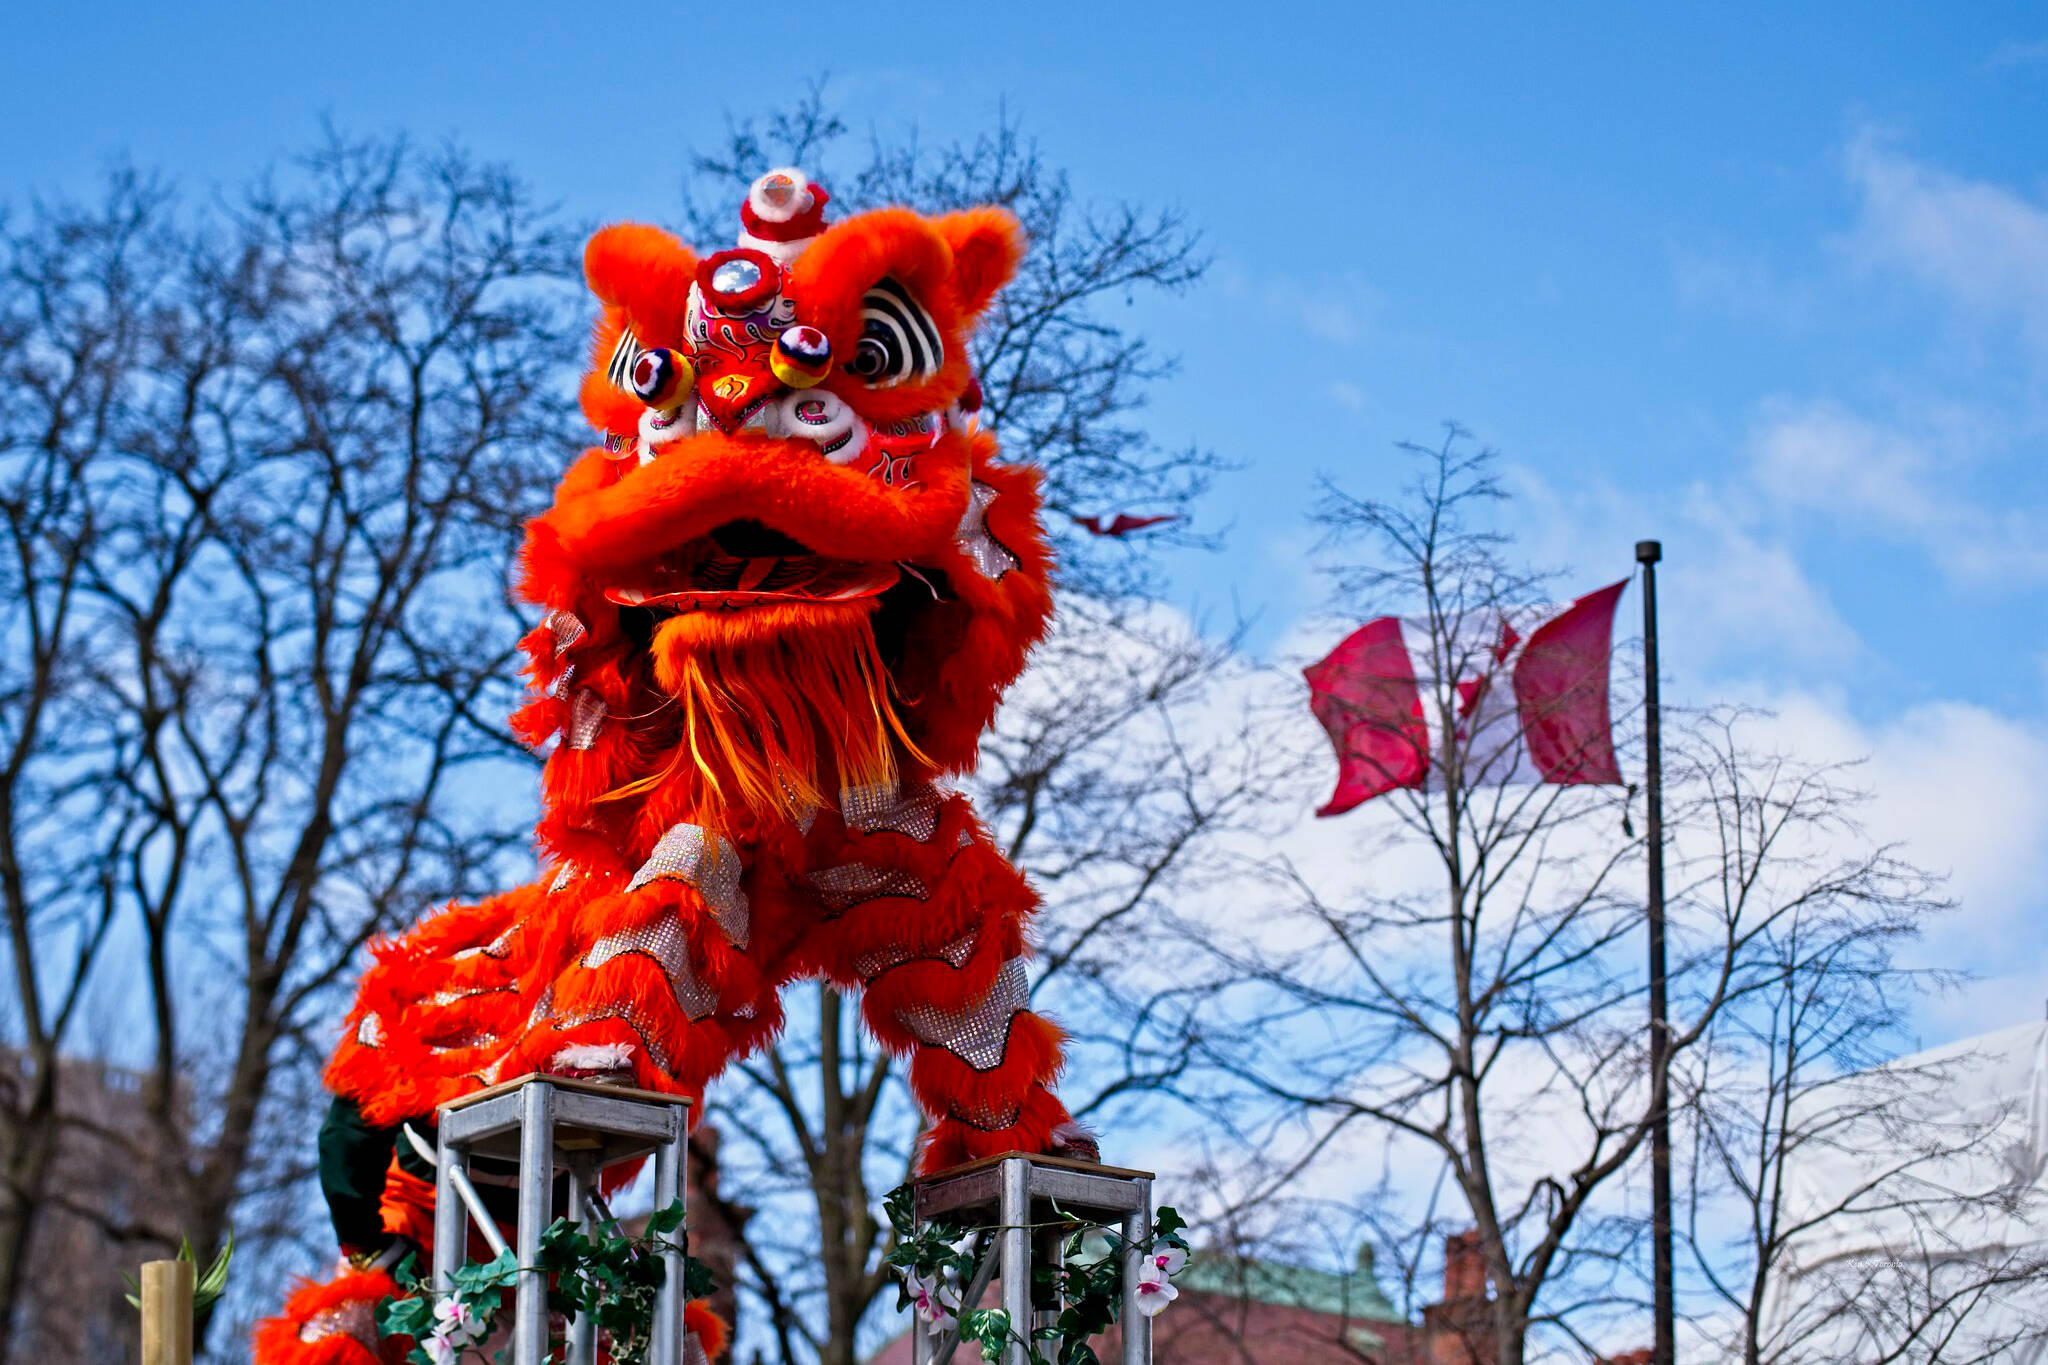 Guide to the Best Lunar New Year Events in Toronto and the GTA